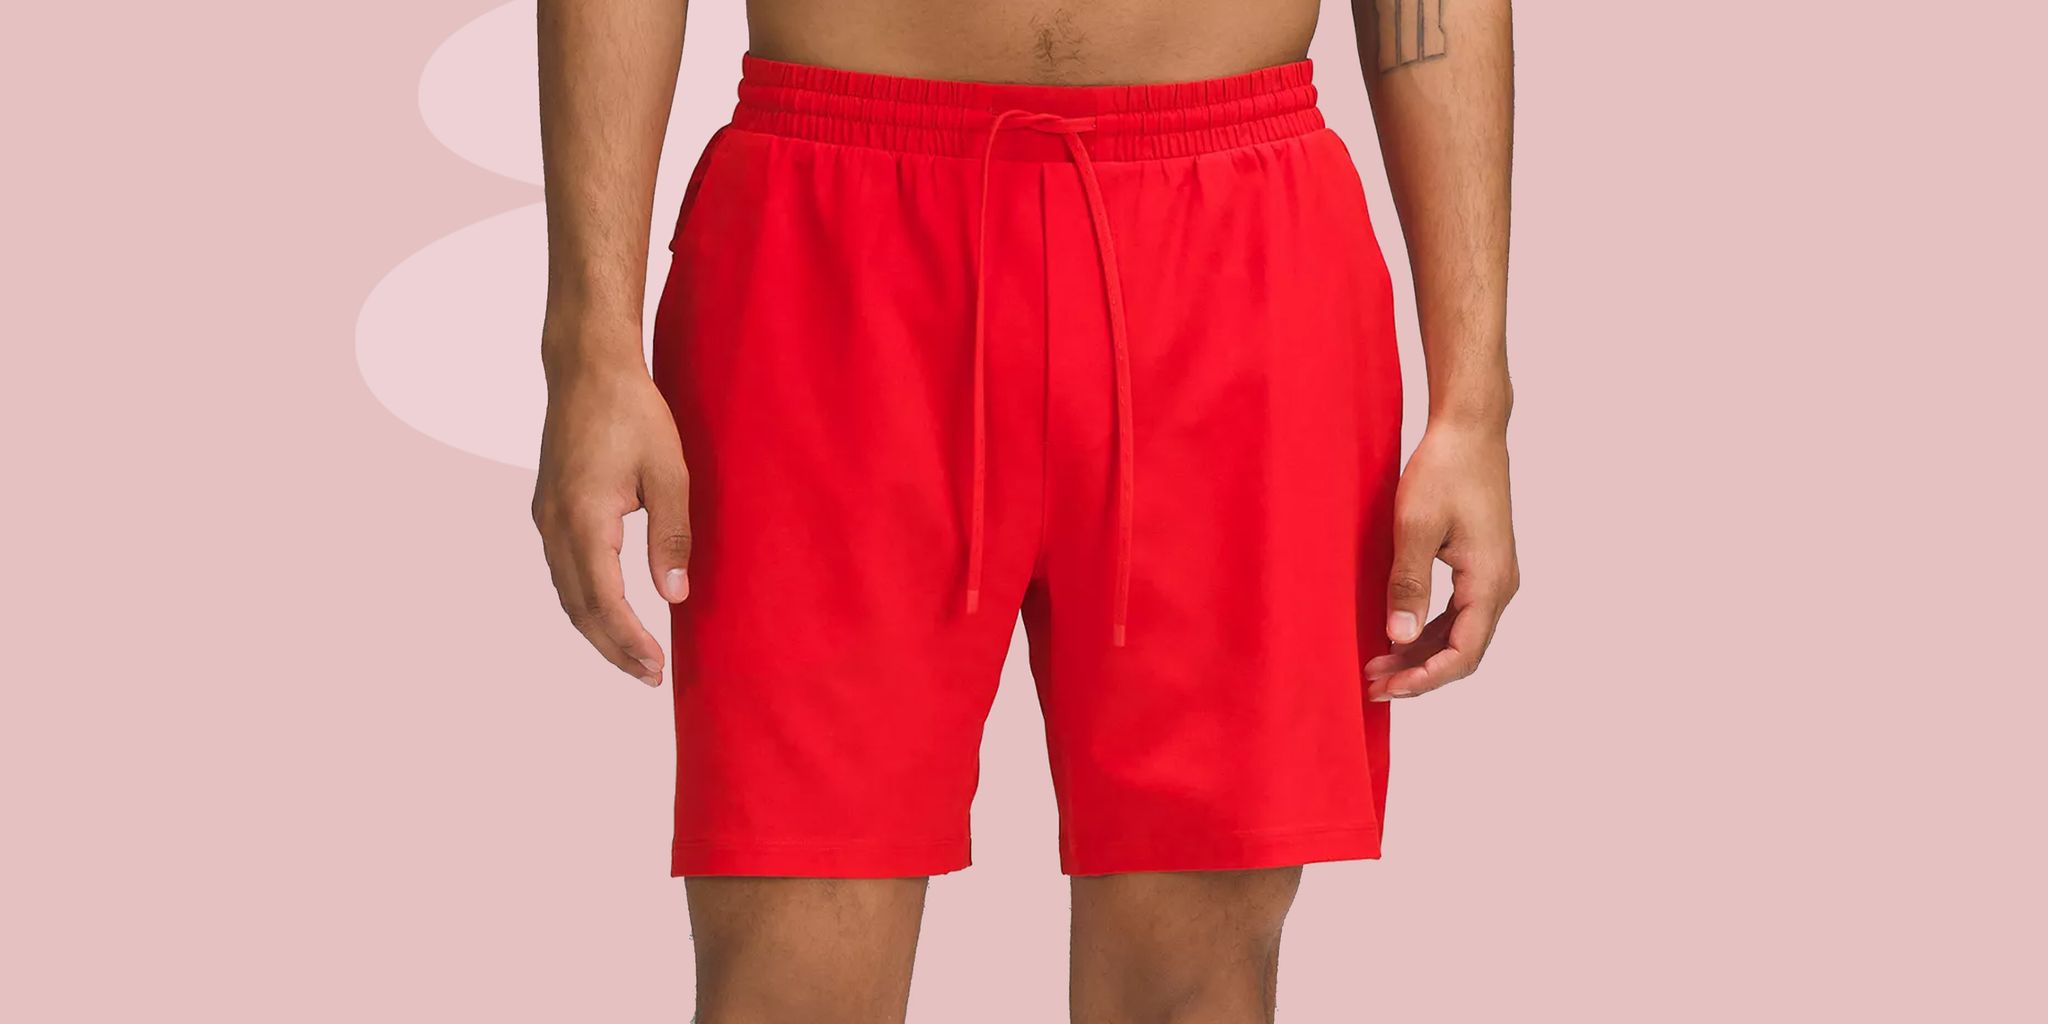 Lululemon Hotty Toddy 4 Inch Shorts Pink Size 8 - $50 (13% Off